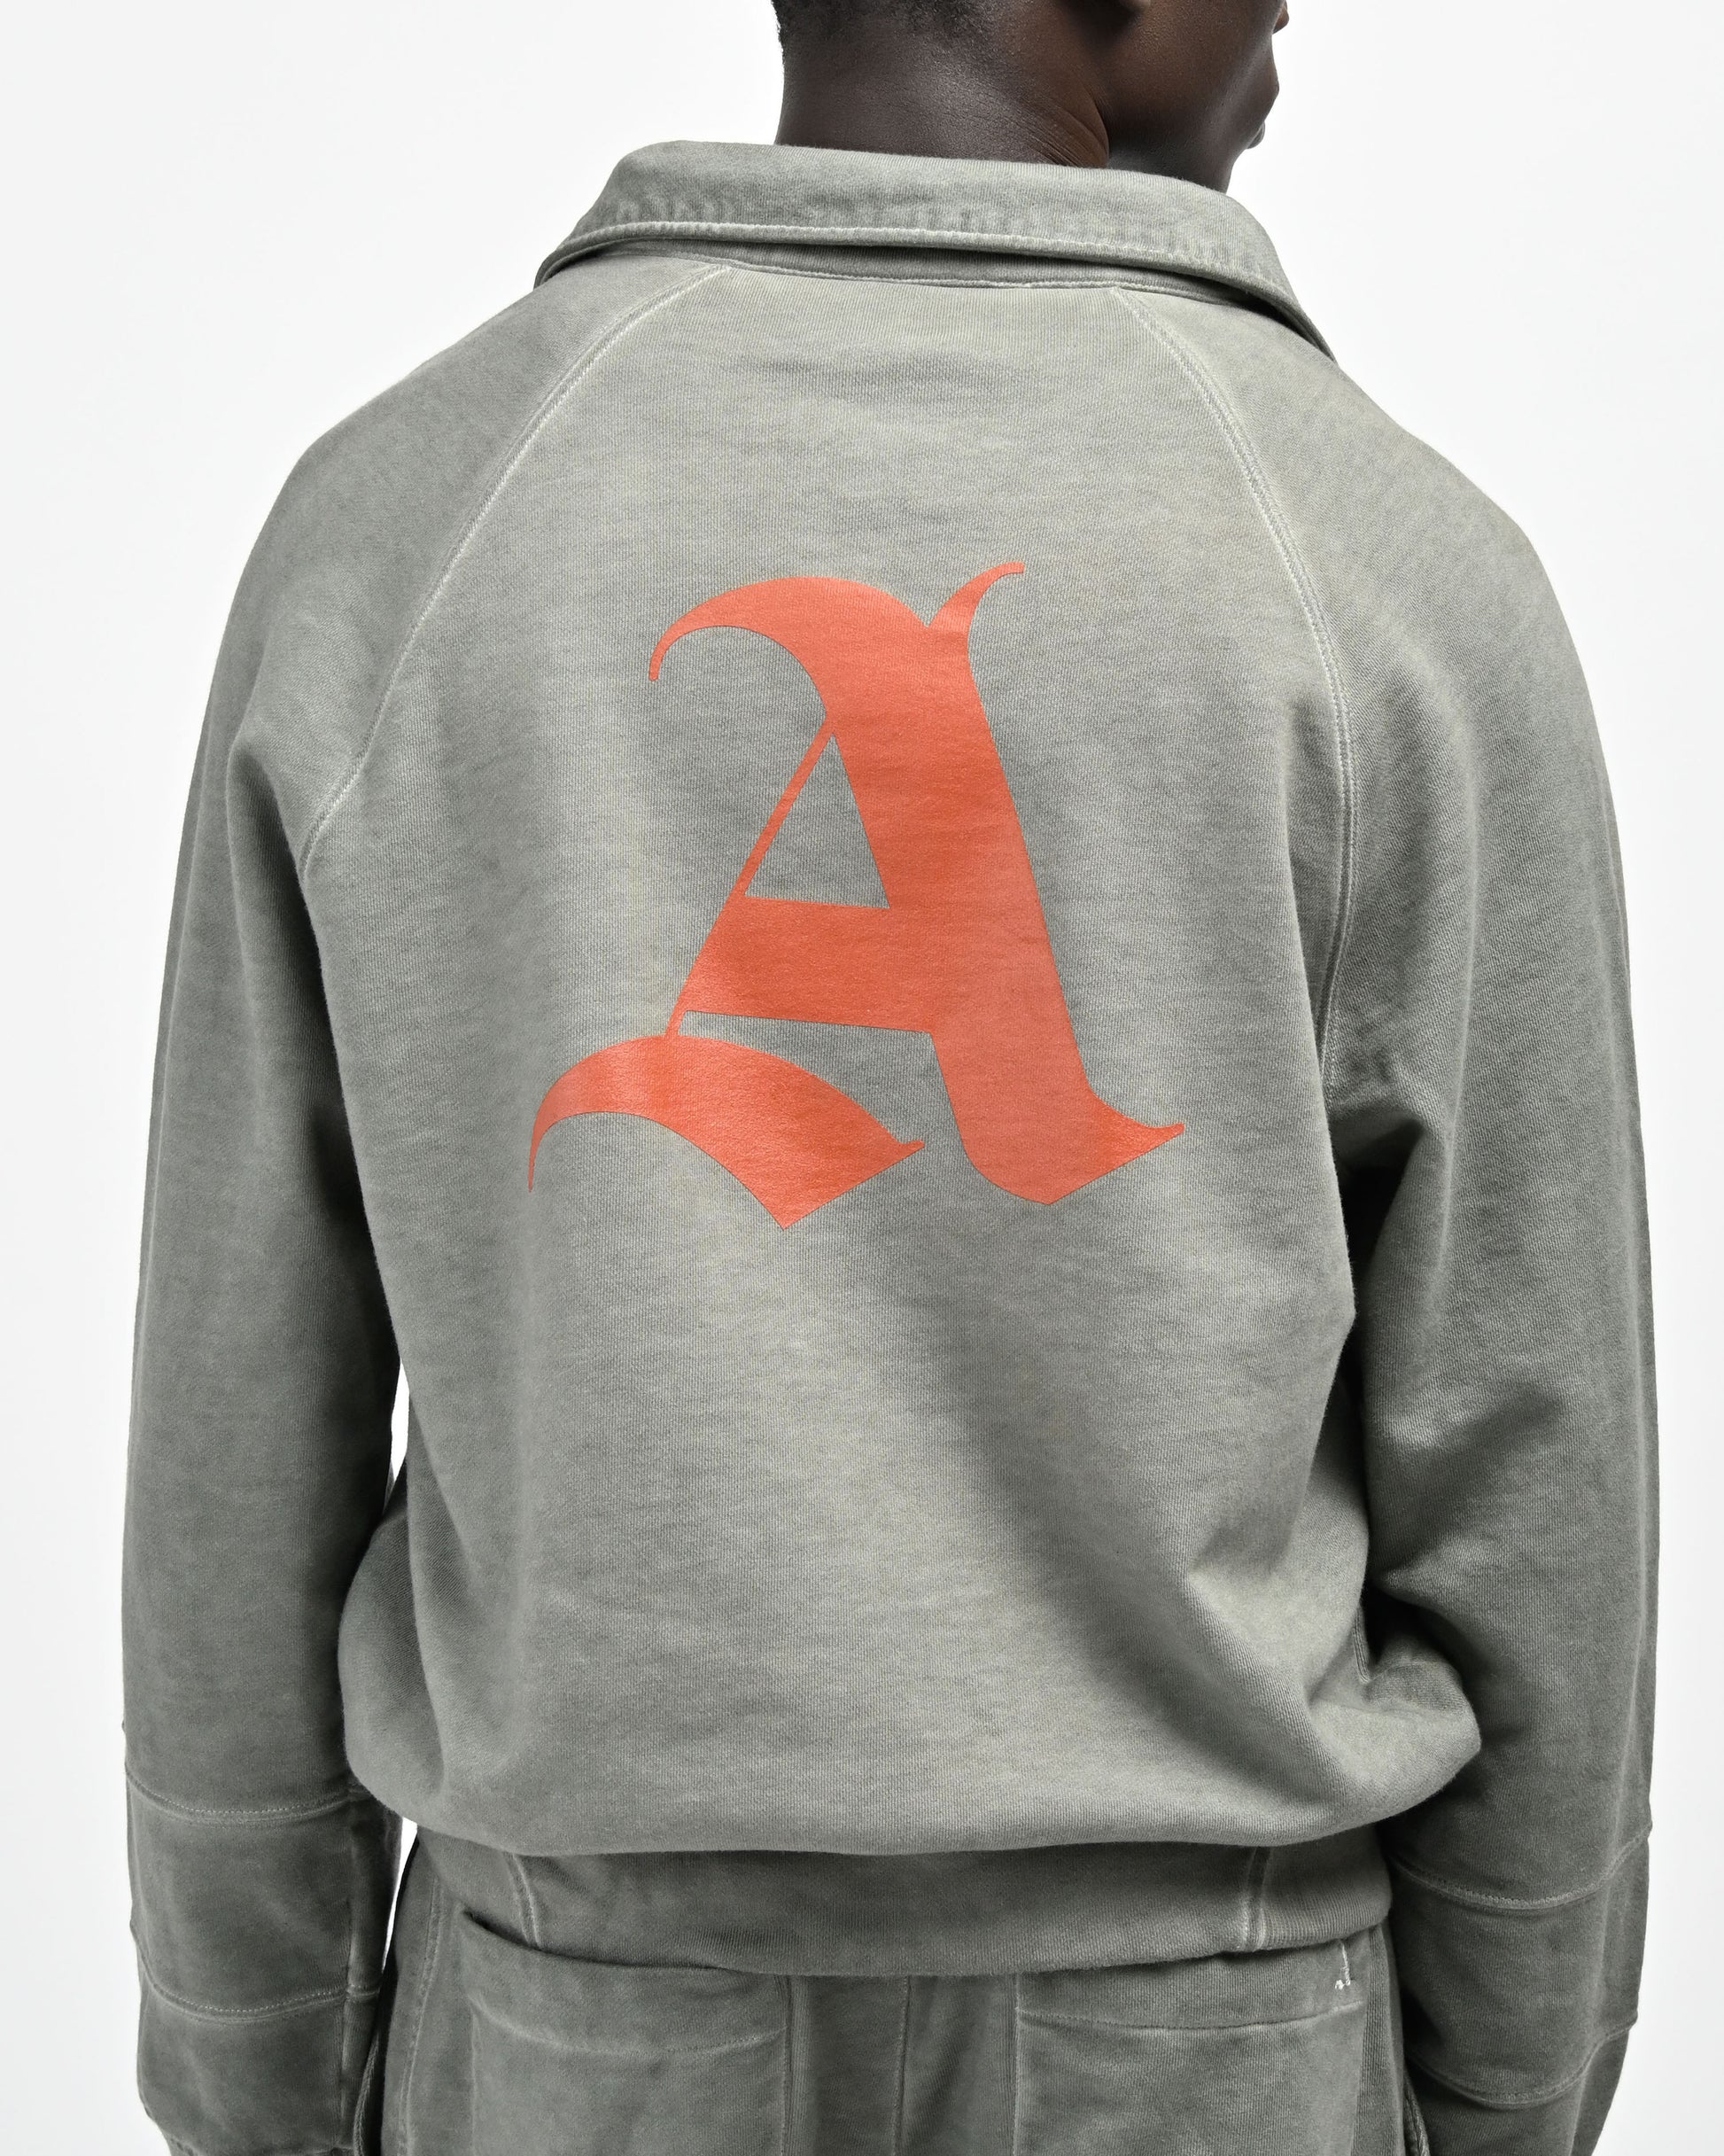 Back View of model in August Pullover Sweatshirt and Printed signature 'A' logo by Aseye Studio